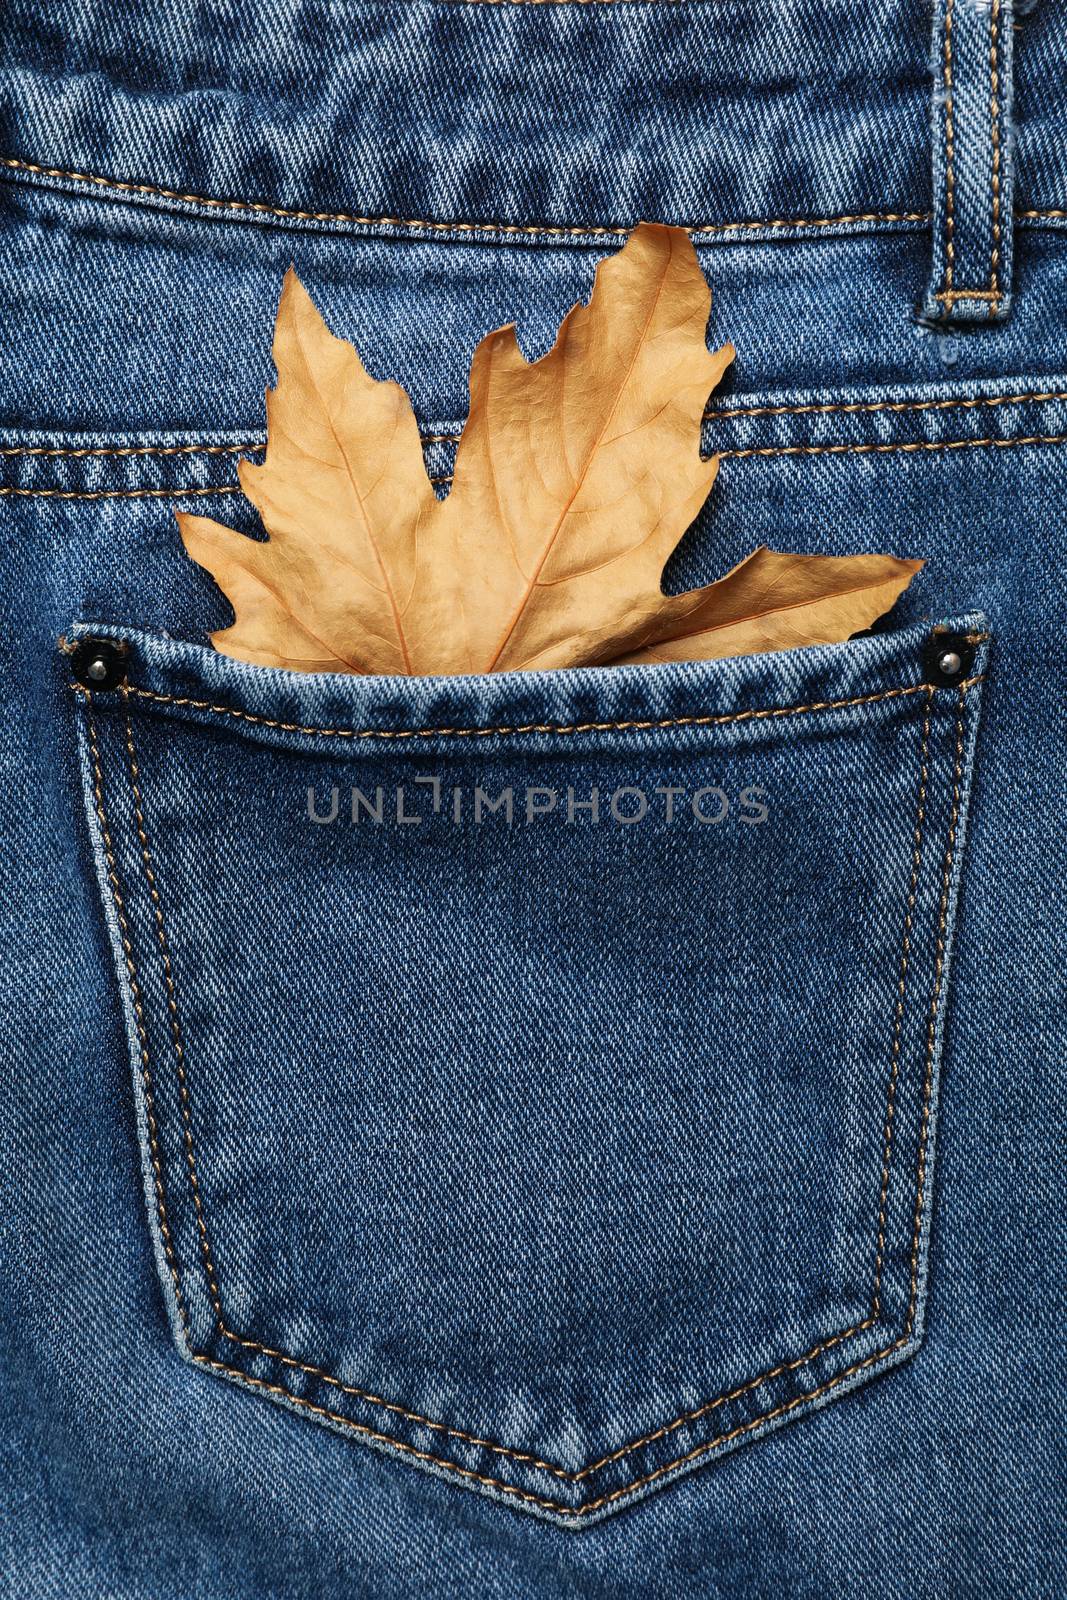 Back of jeans with leaf in pocket, space for text by AtlasCompany